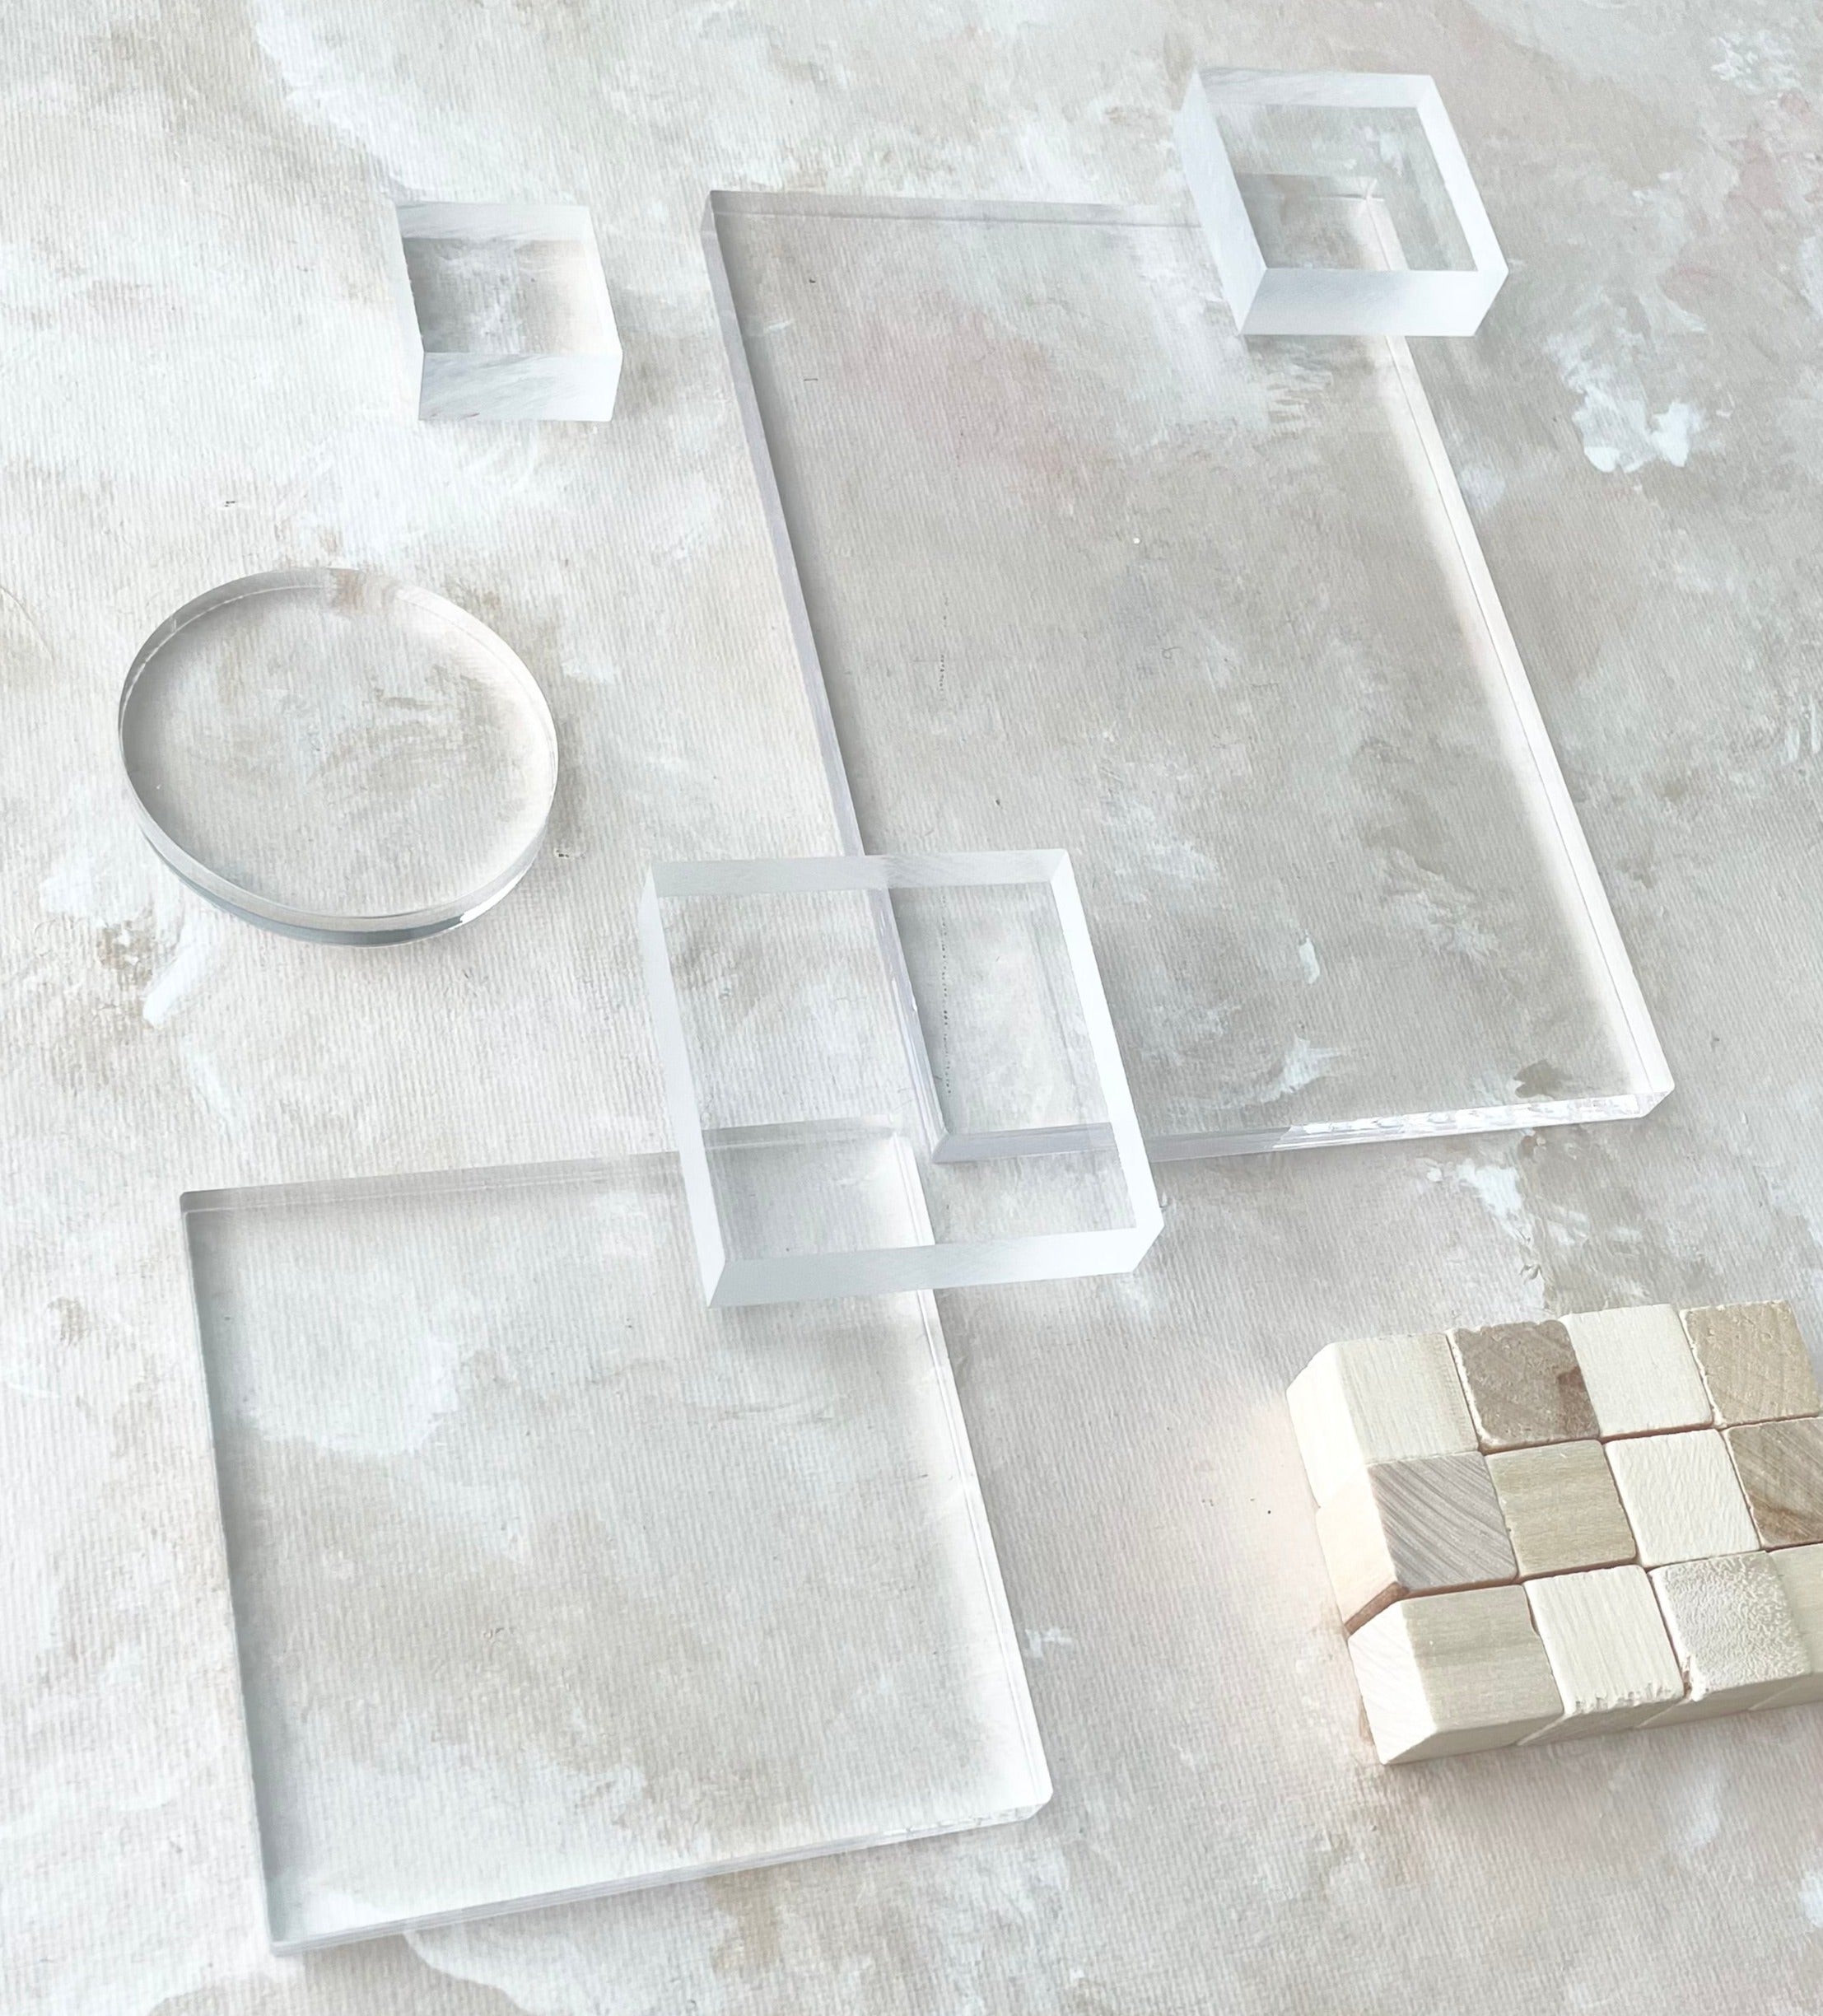 Clear Acrylic Styling Block Set including 4 different sized squares, one large rectangle, and one circle - Flat Lay props from Champagne & GRIT